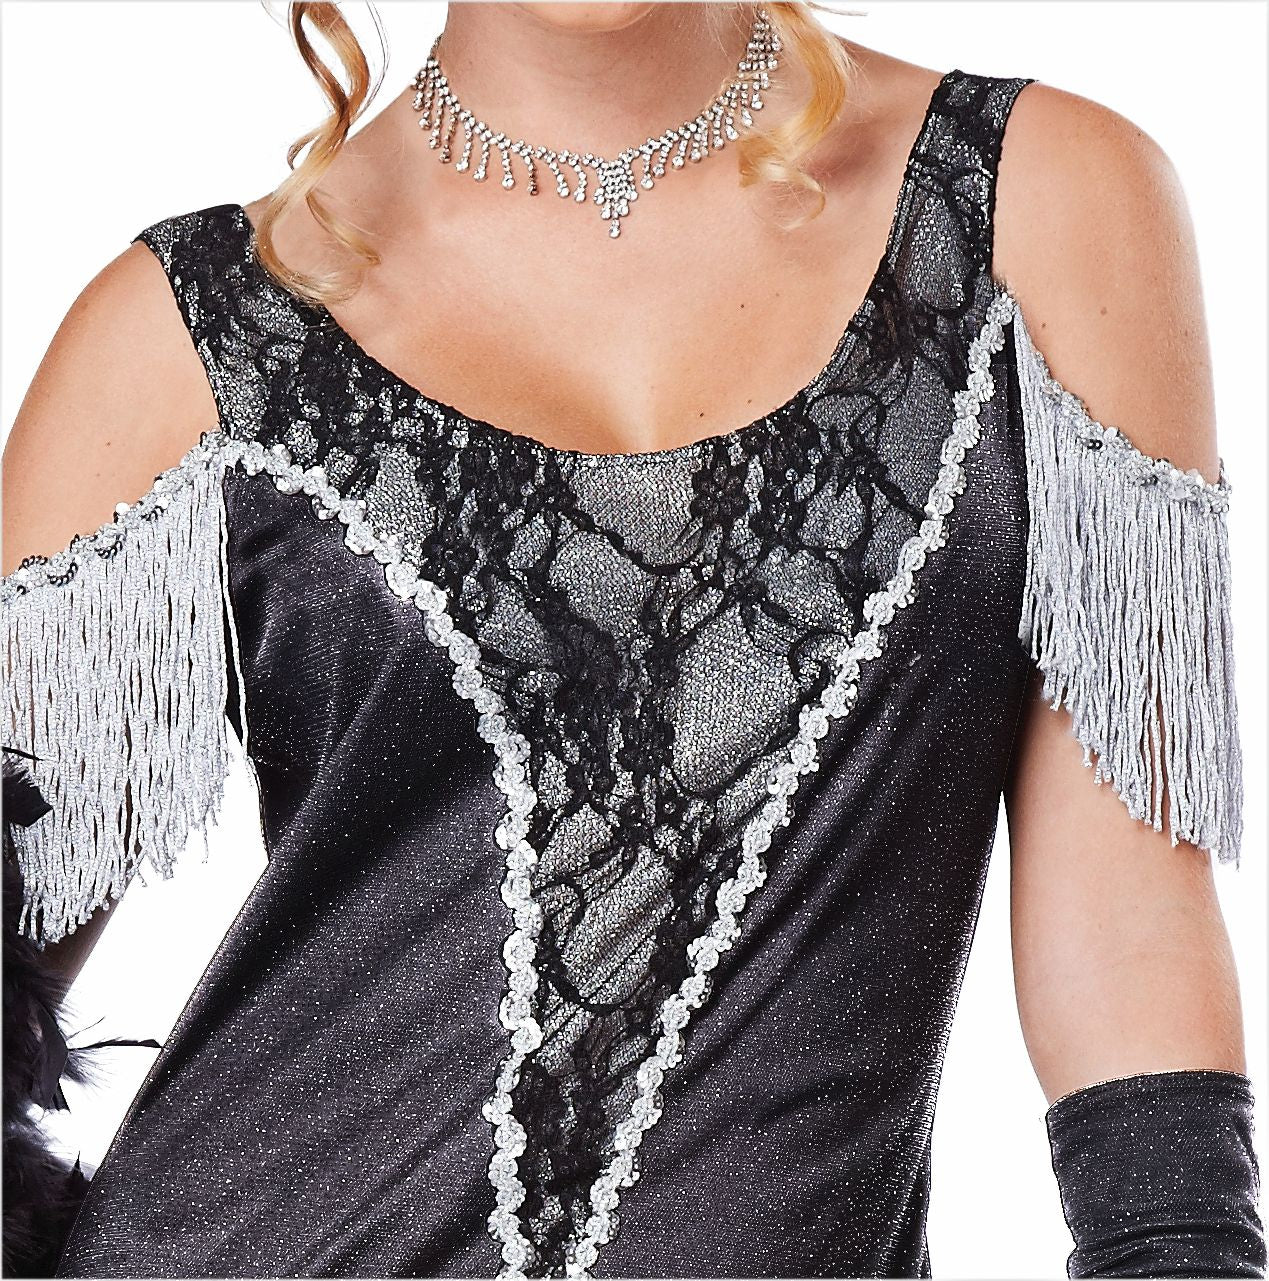 1920's Razzle Dazzle Glamorous Flapper Fancy Dress Costume with gloves